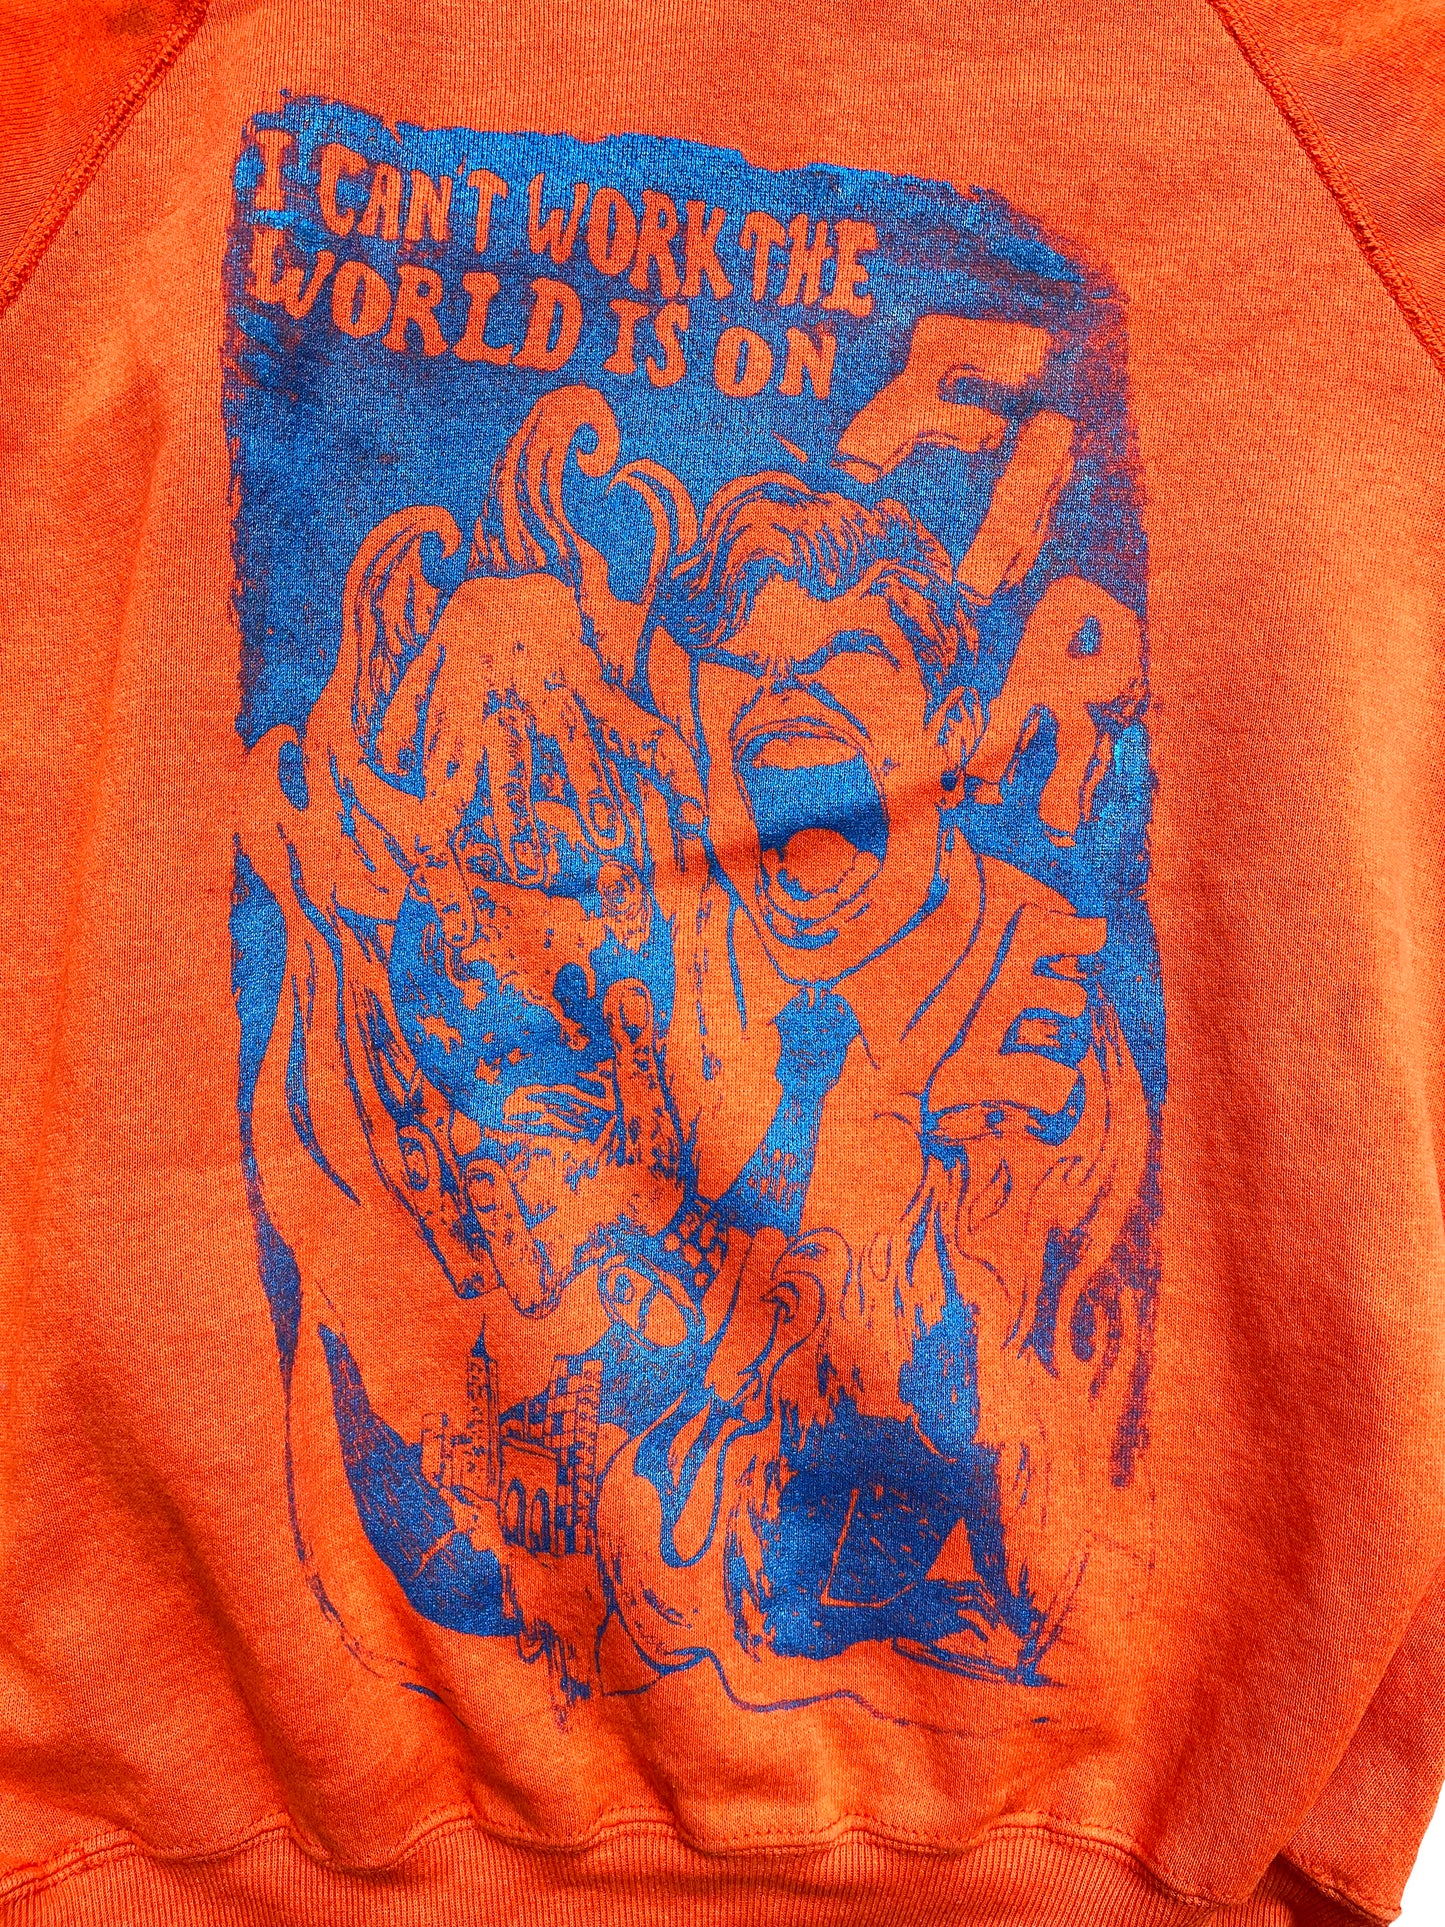 Medium I Can't Work the World is on Fire orange sweater graphic tee 01